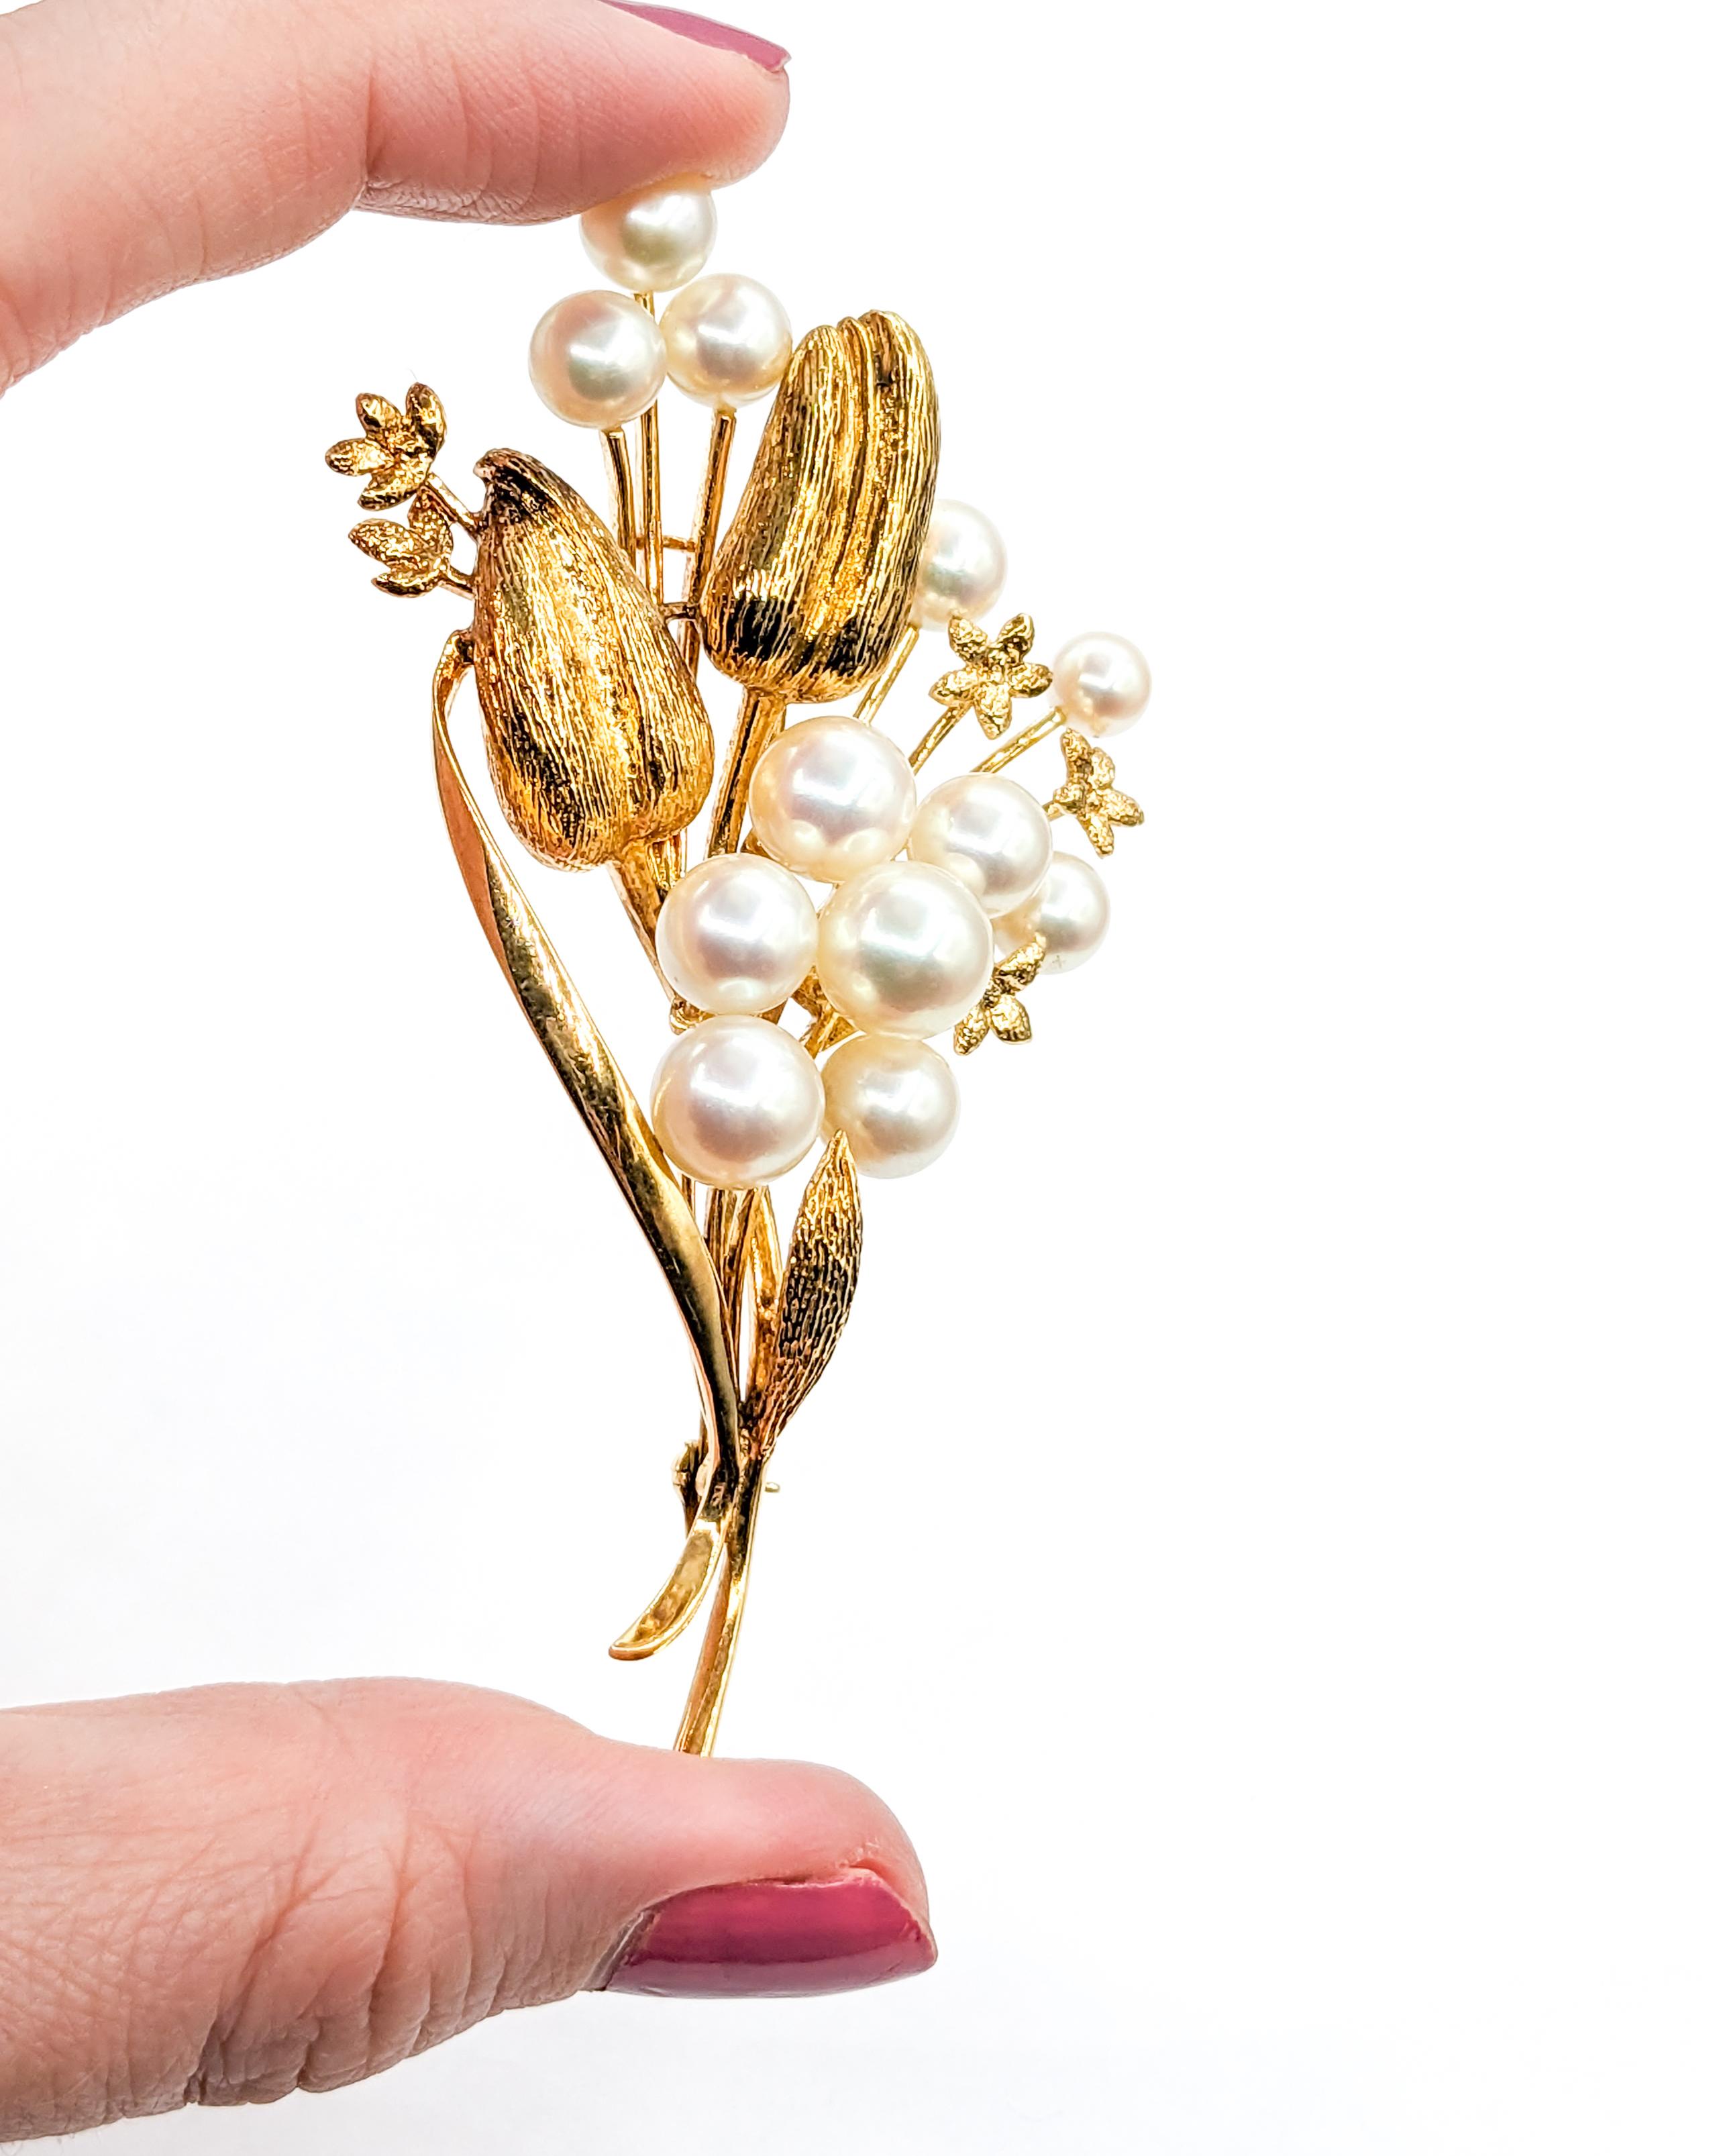 Elegant Mikimoto Brooch Adorned with Akoya Pearls

Experience the allure of timeless elegance with this beautiful Mikimoto brooch, masterfully crafted in the warm glow of 14ky yellow gold. This piece showcases an array of lustrous 5.5-8.6mm Akoya